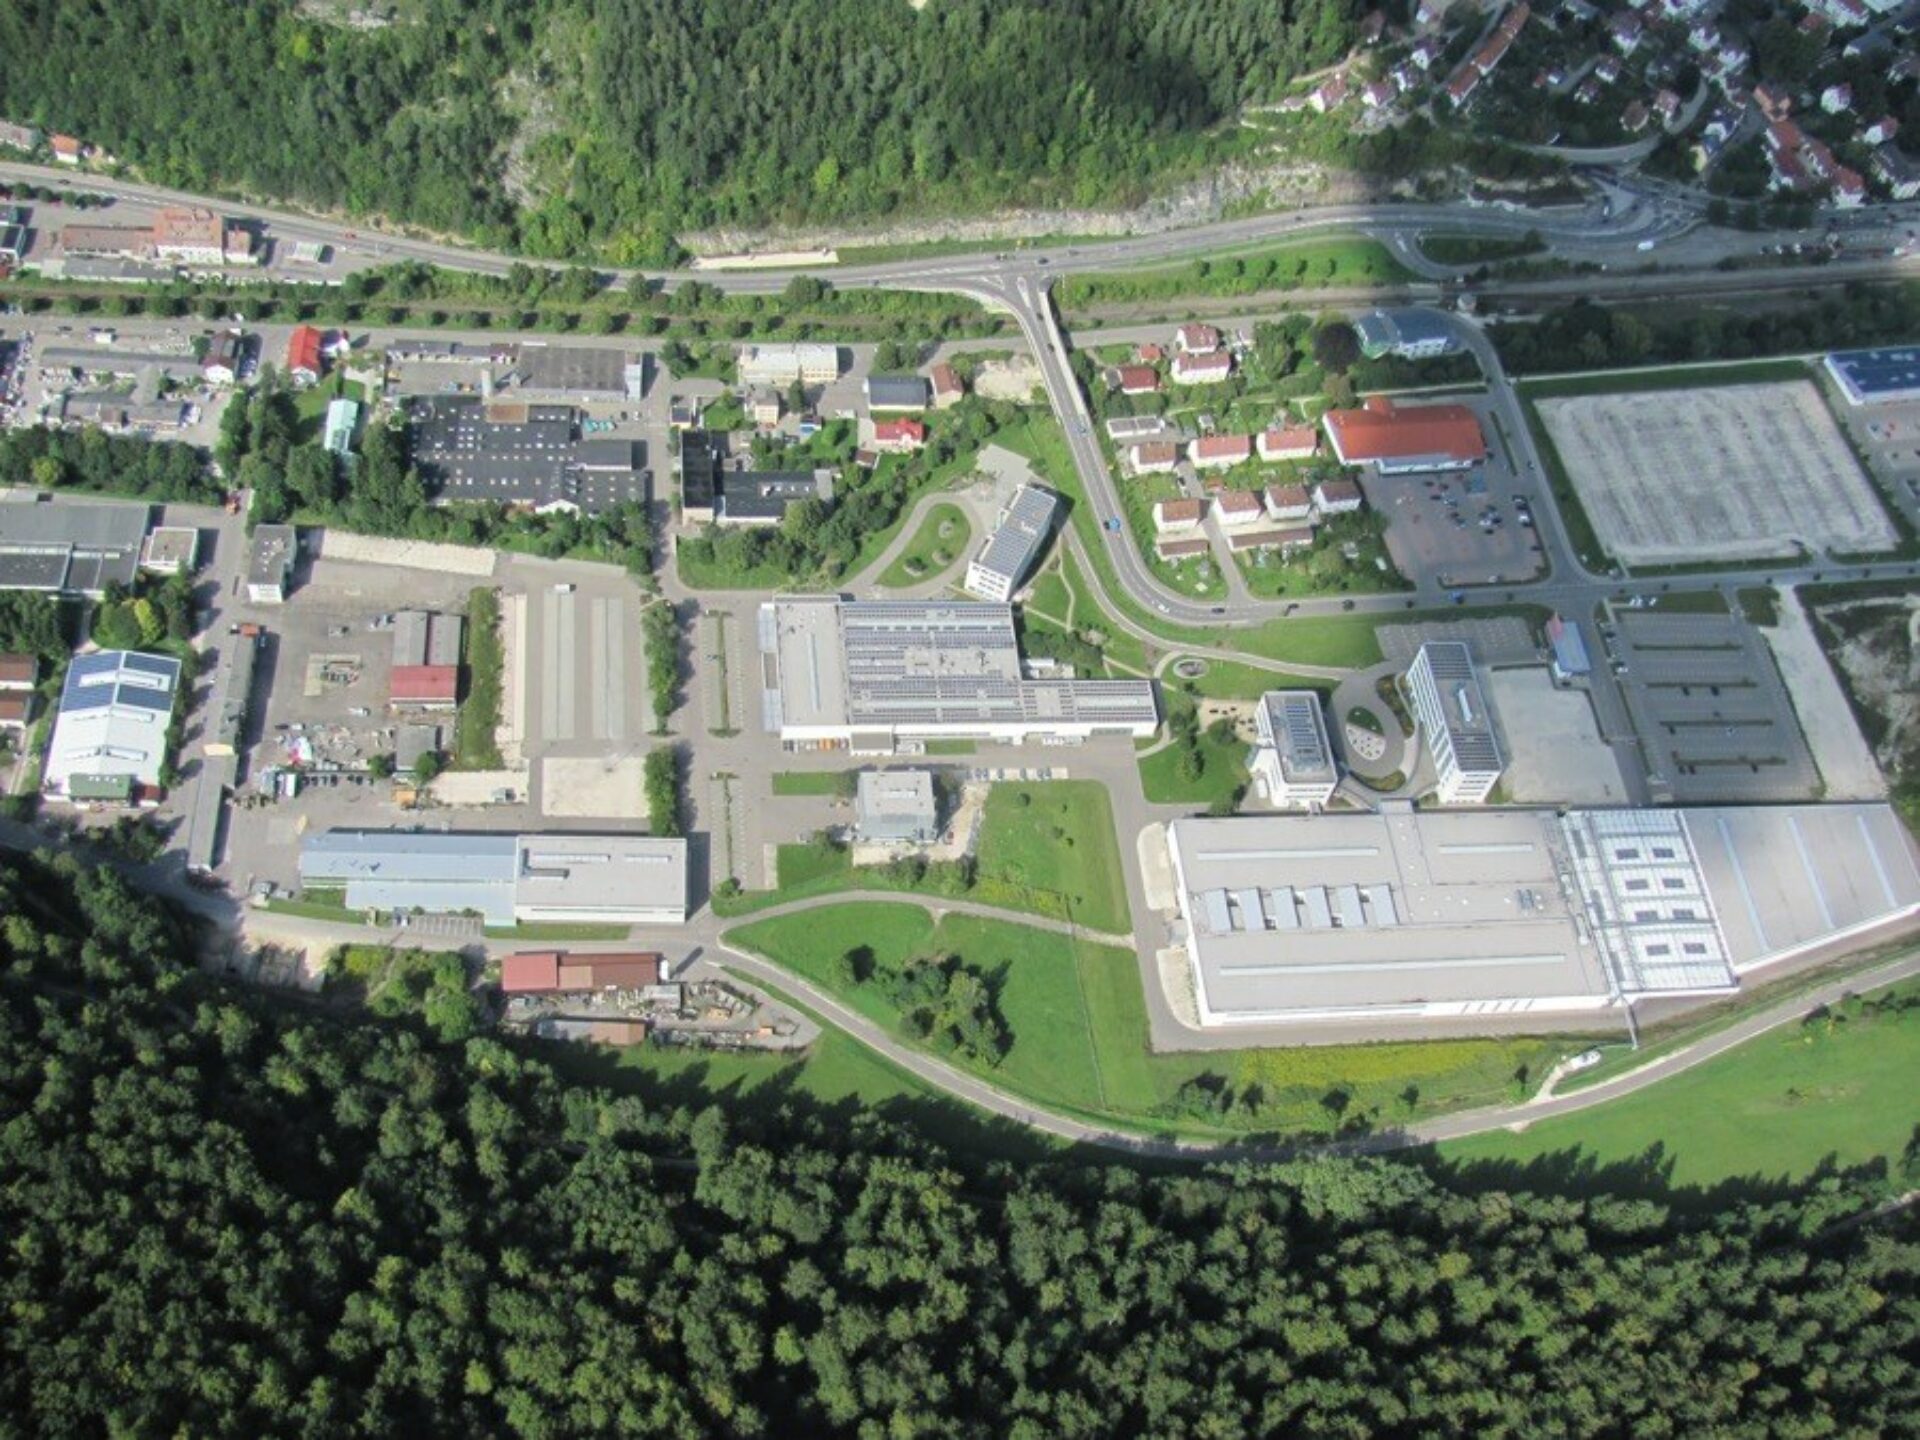 Centrotherm factory expansion - Office and Production Complex PV industry1181